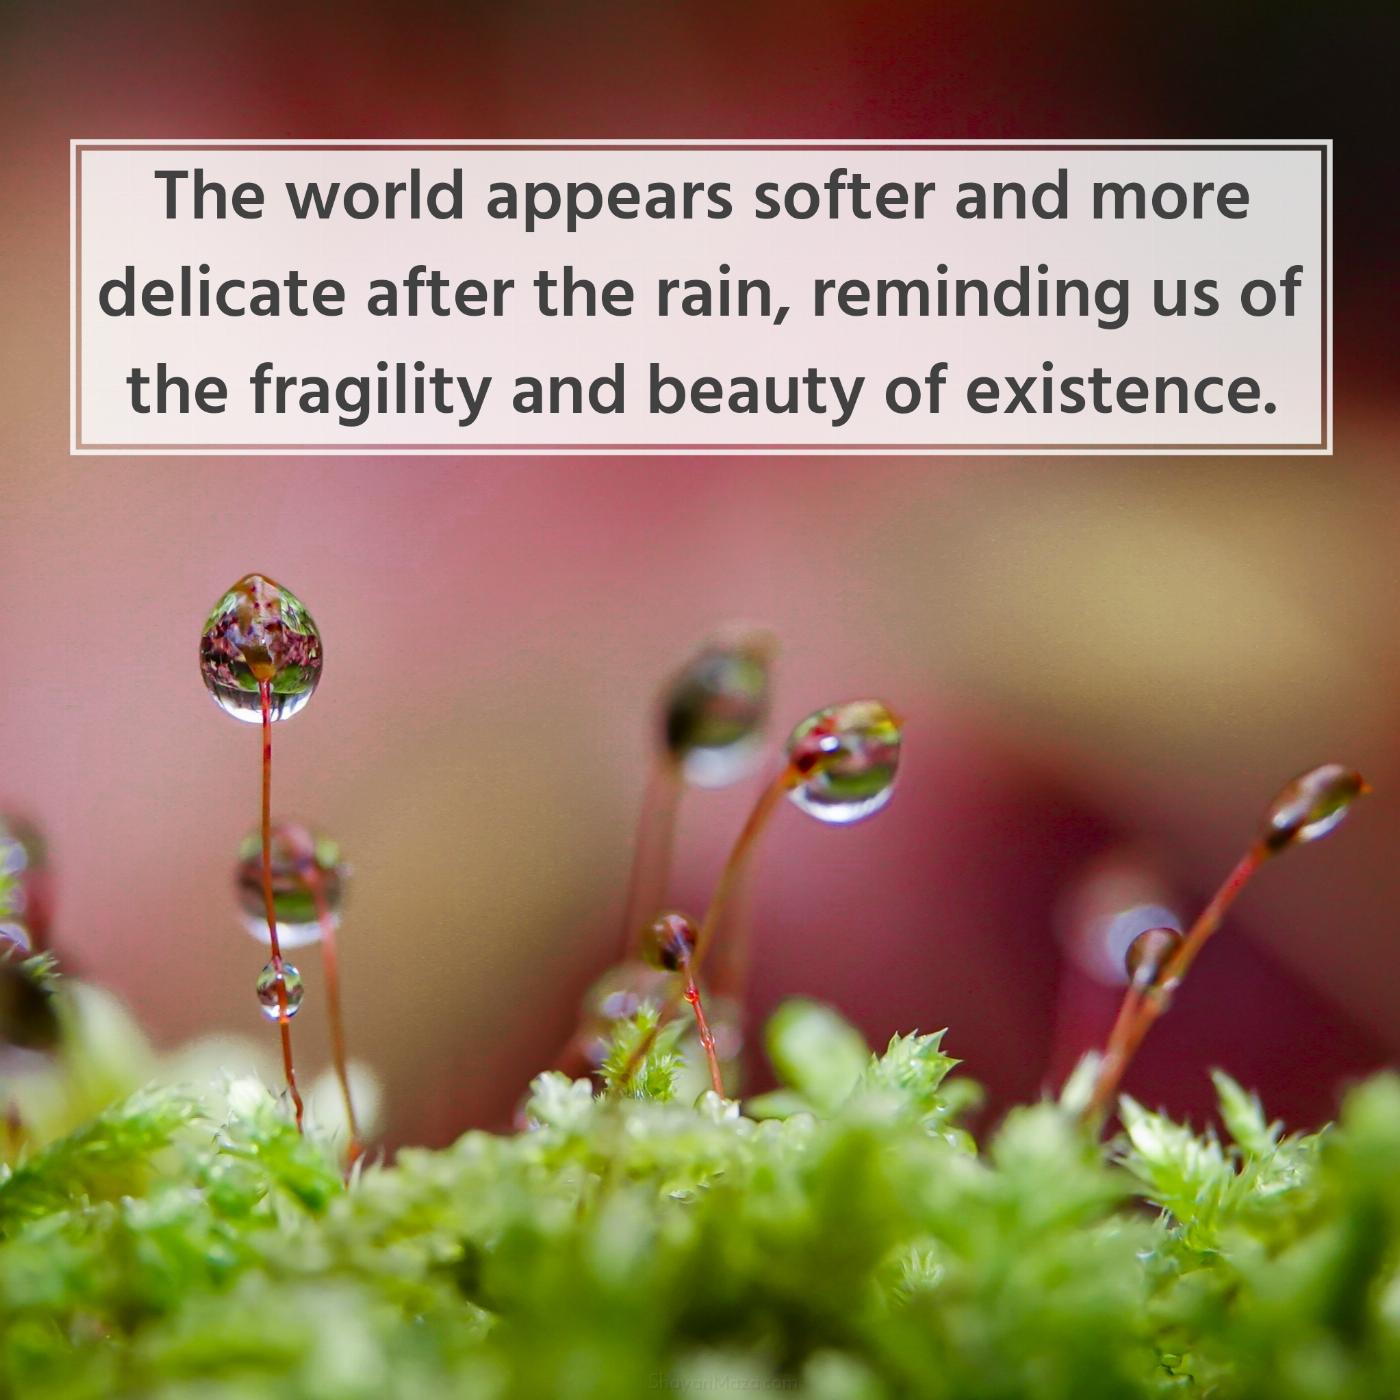 The world appears softer and more delicate after the rain